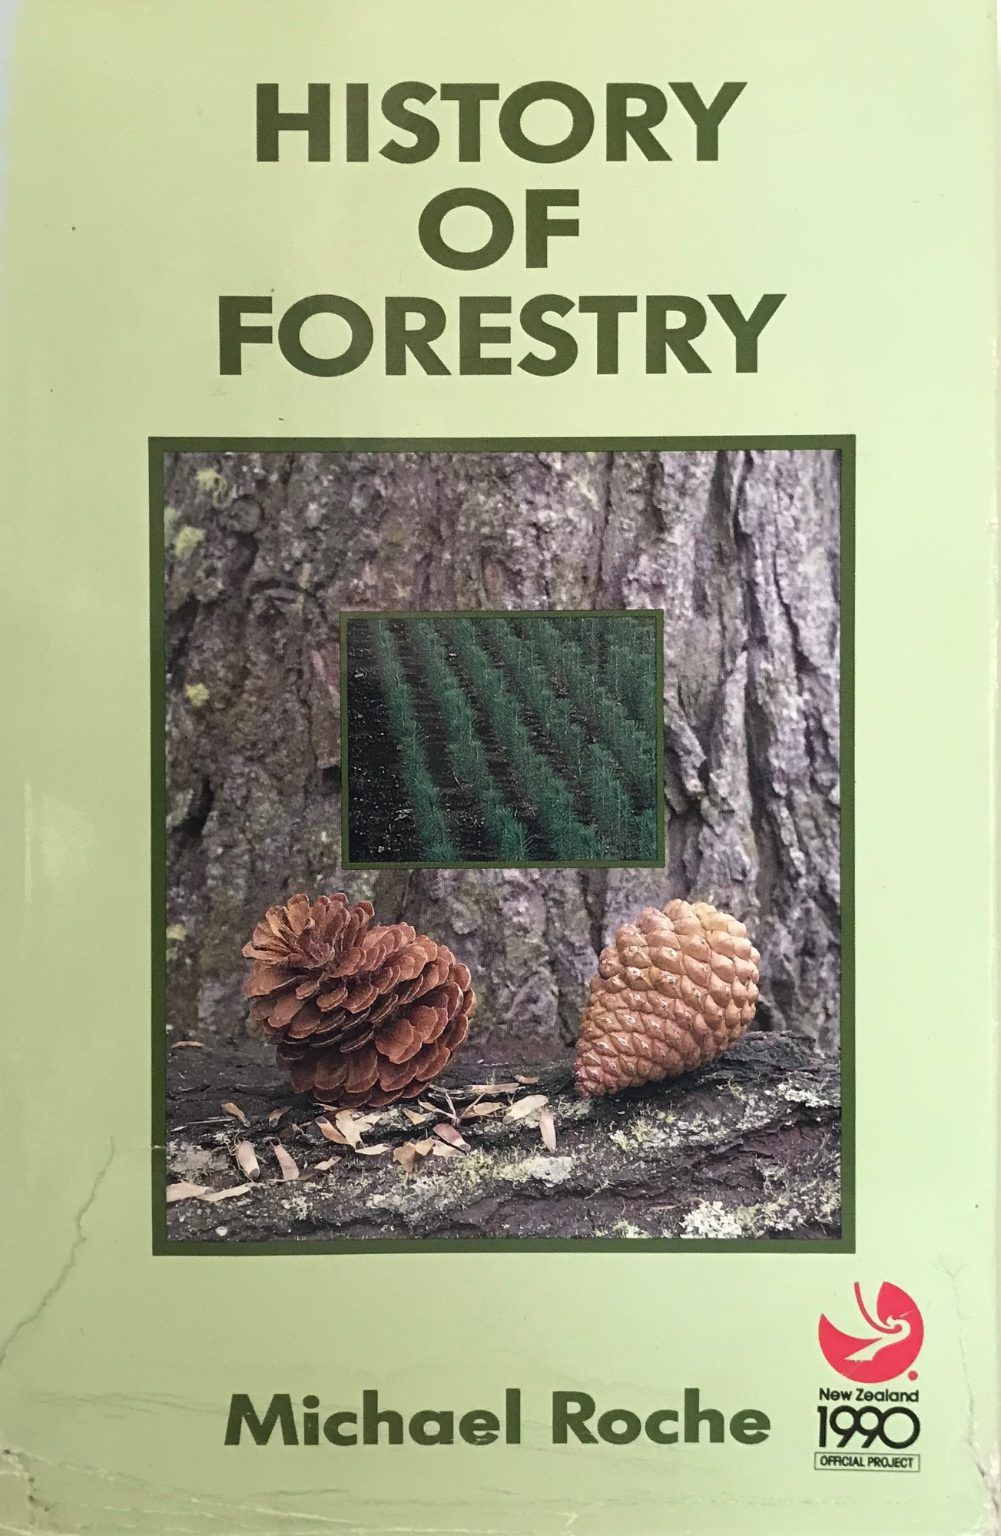 HISTORY OF FORESTRY